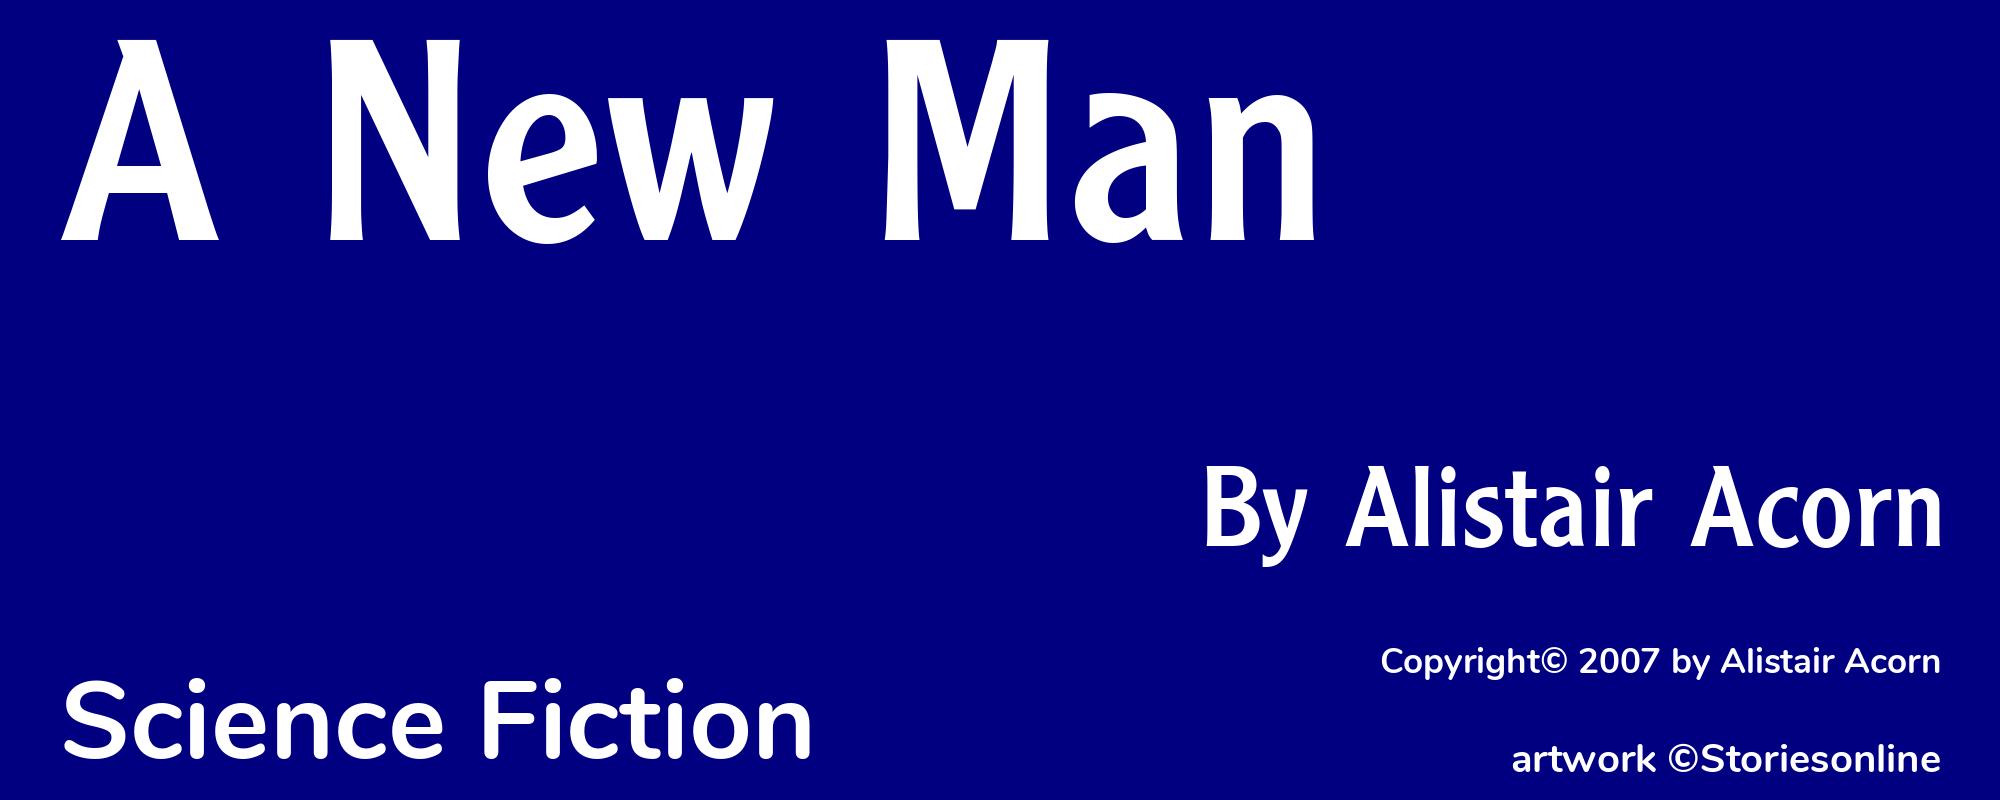 A New Man - Cover